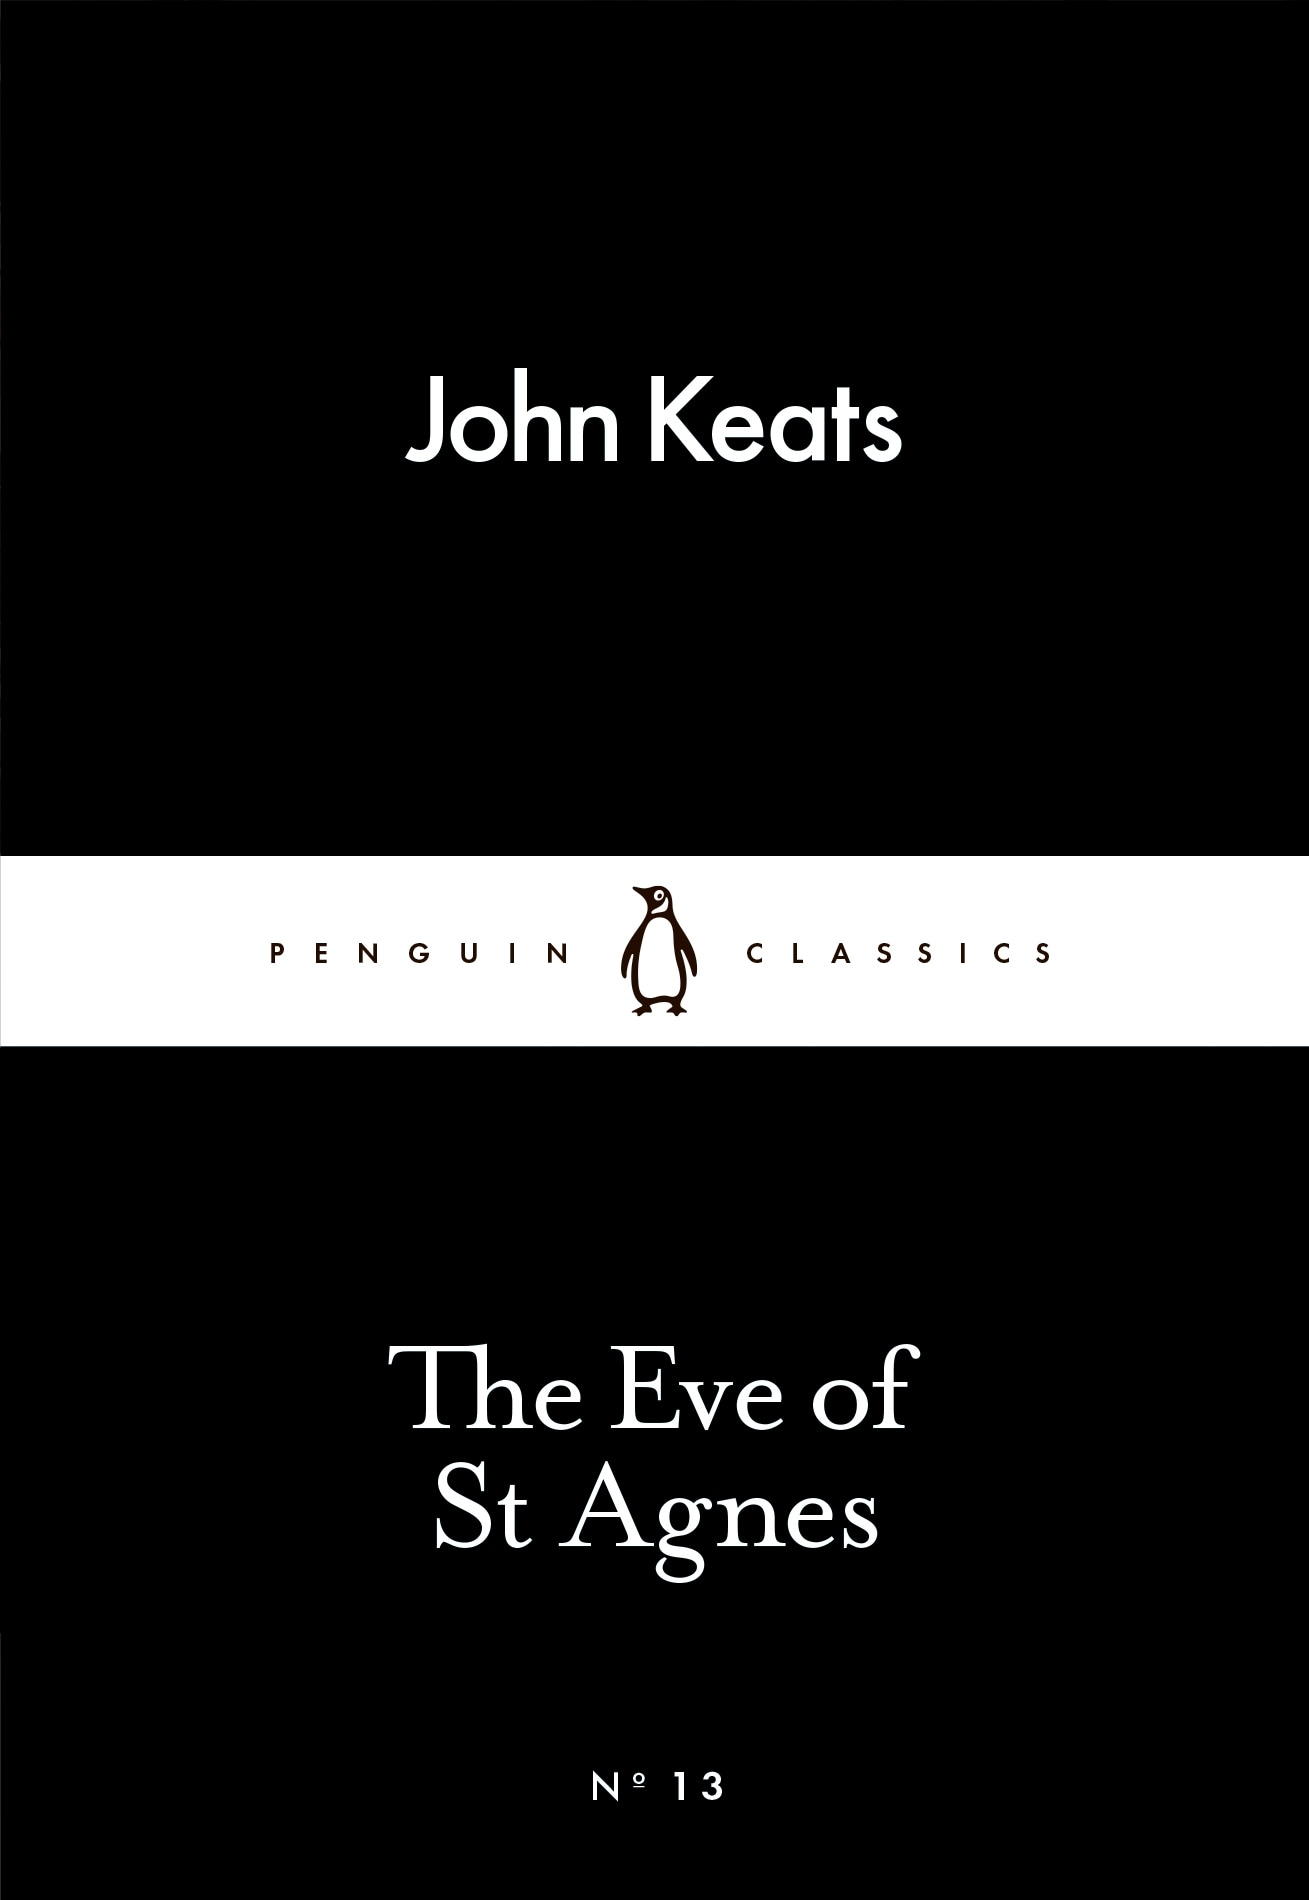 Book “The Eve of St Agnes” by John Keats — February 26, 2015